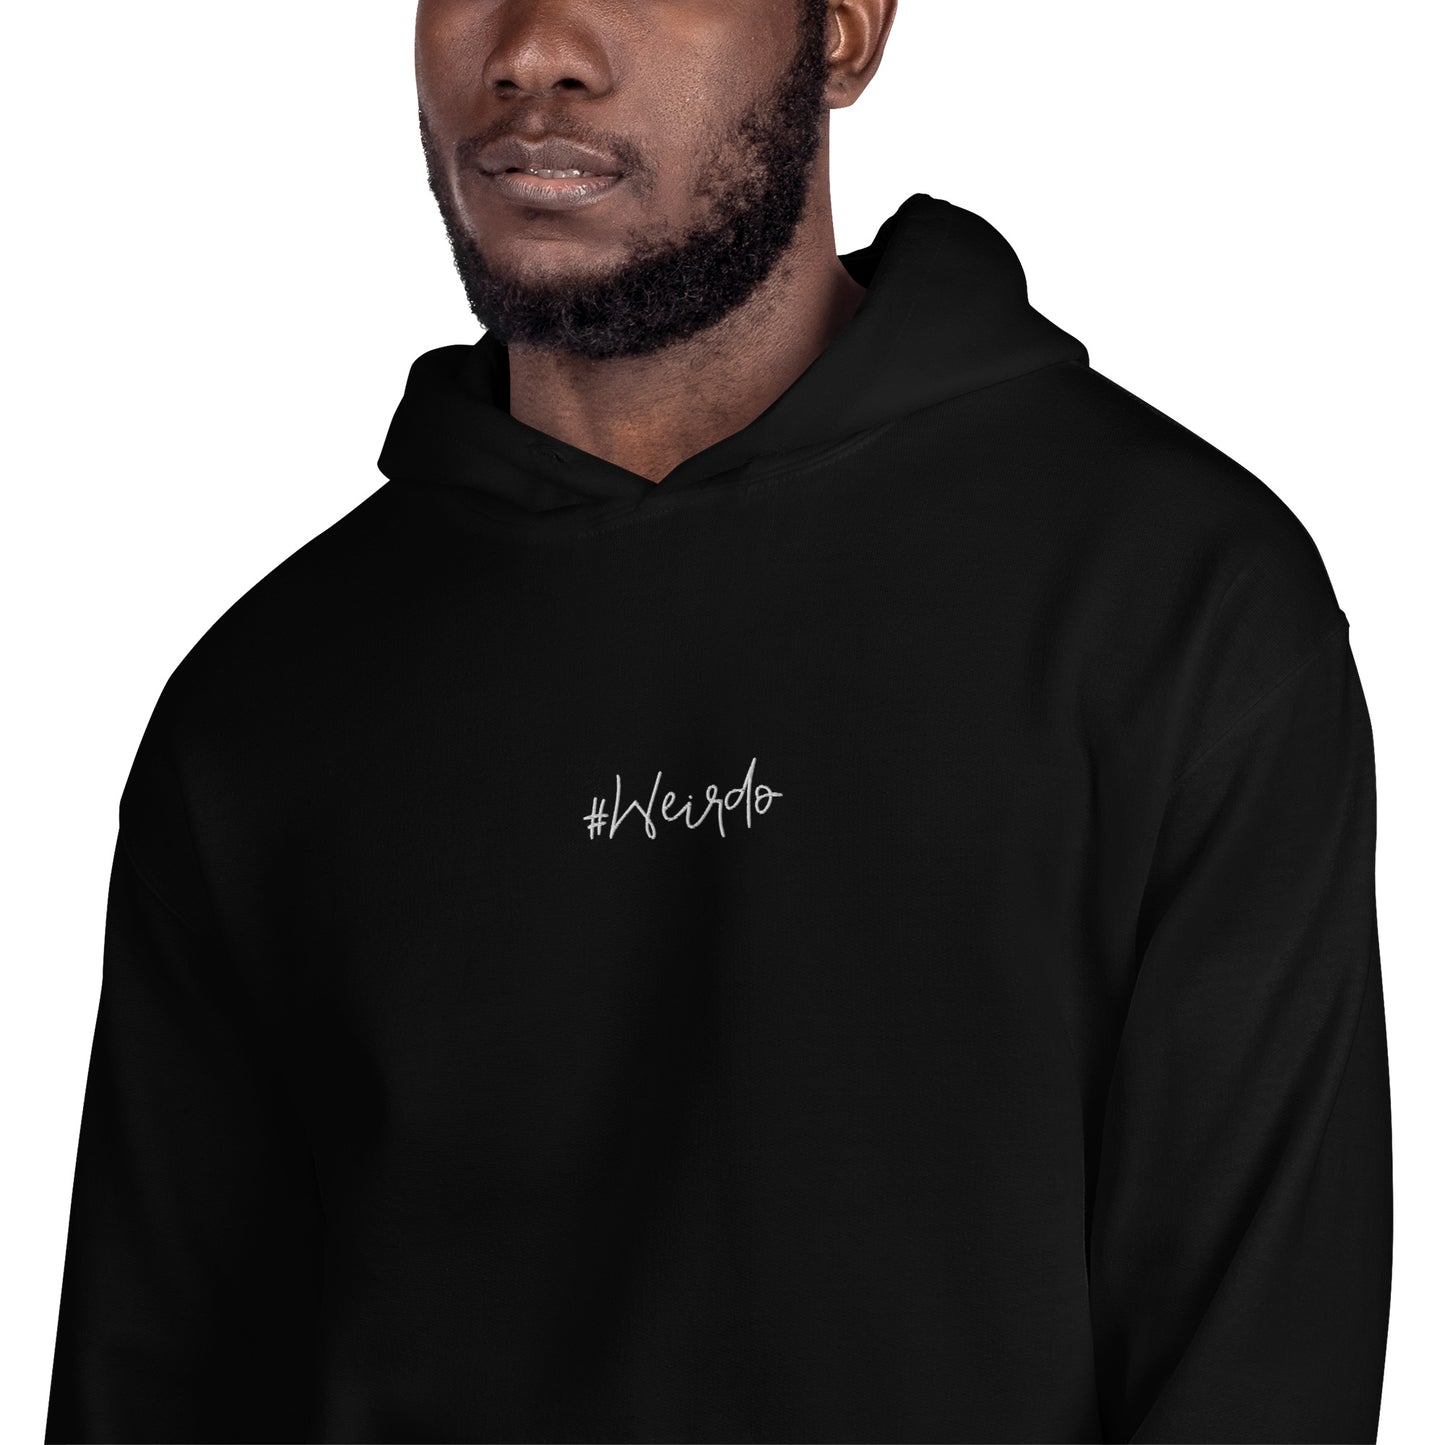 #WEIRDO | The logo is made with needle and thread, so it will give this basic but weird hoodie for men an extra touch. Check out more #Weirdo stuff from the basic line in our online giftstore.